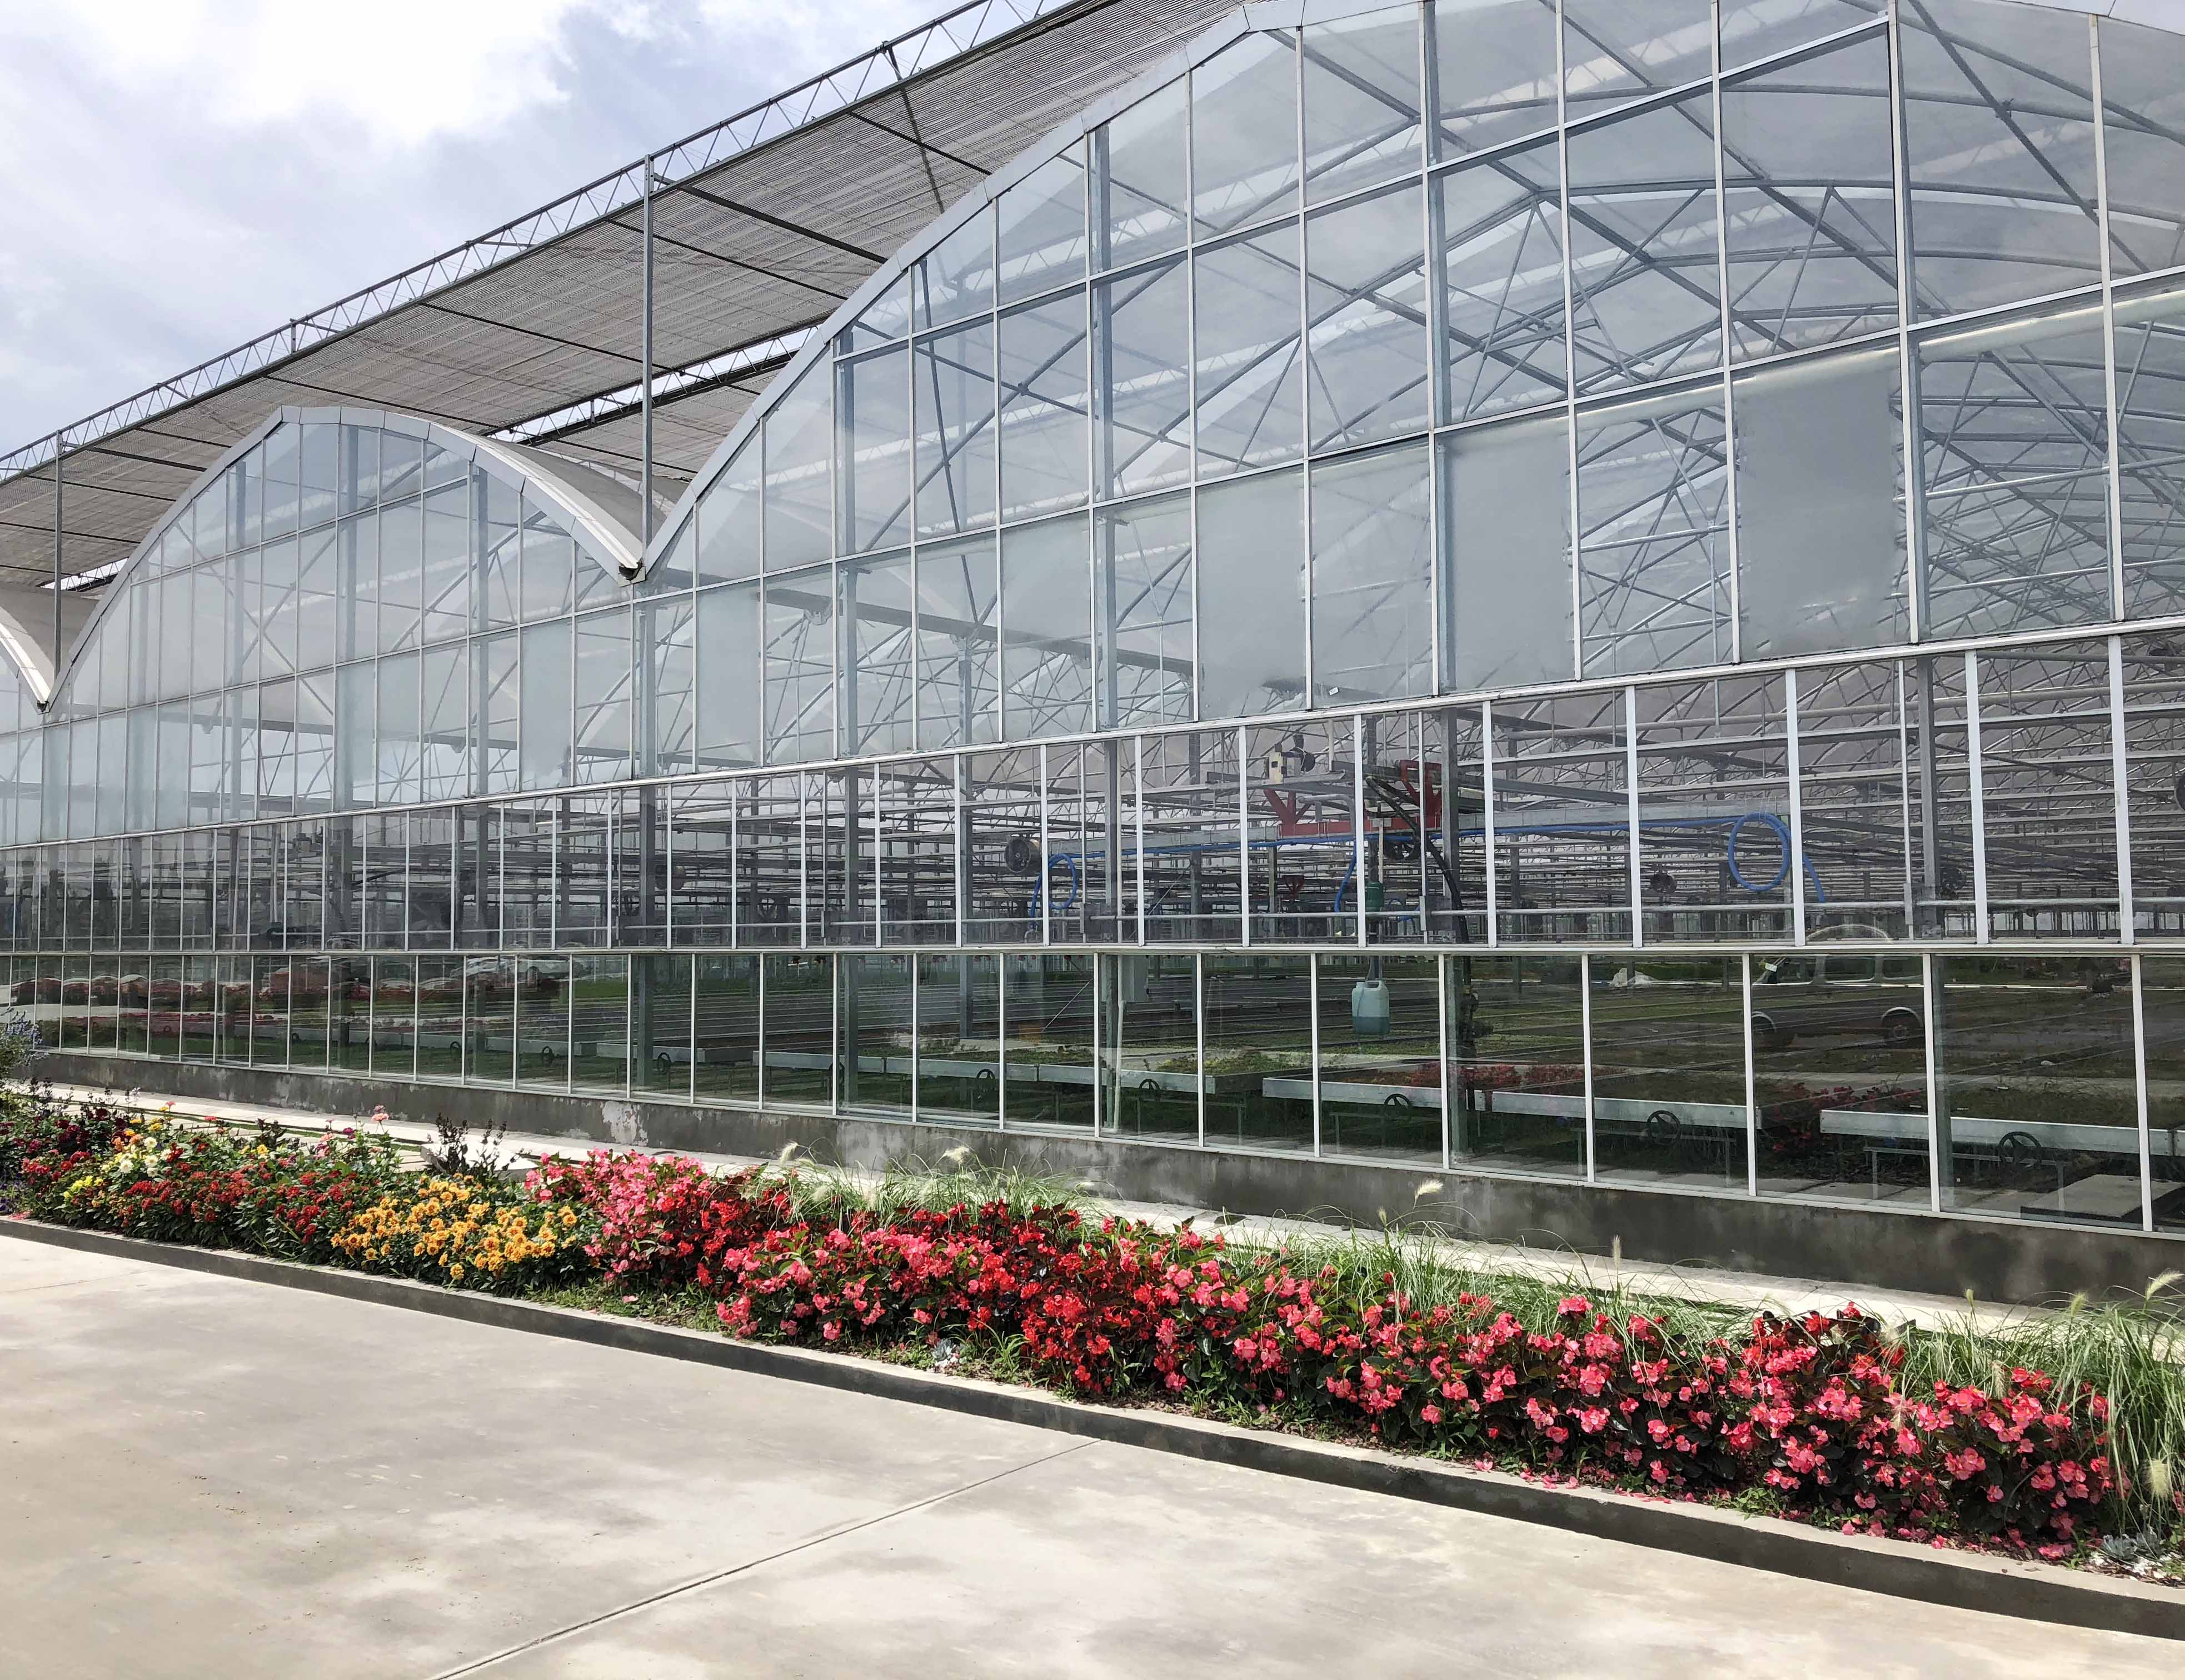 Hot dip Galvanized Steel commercial used glass greenhouse with light deprivation for for herb cultivation Featured Image